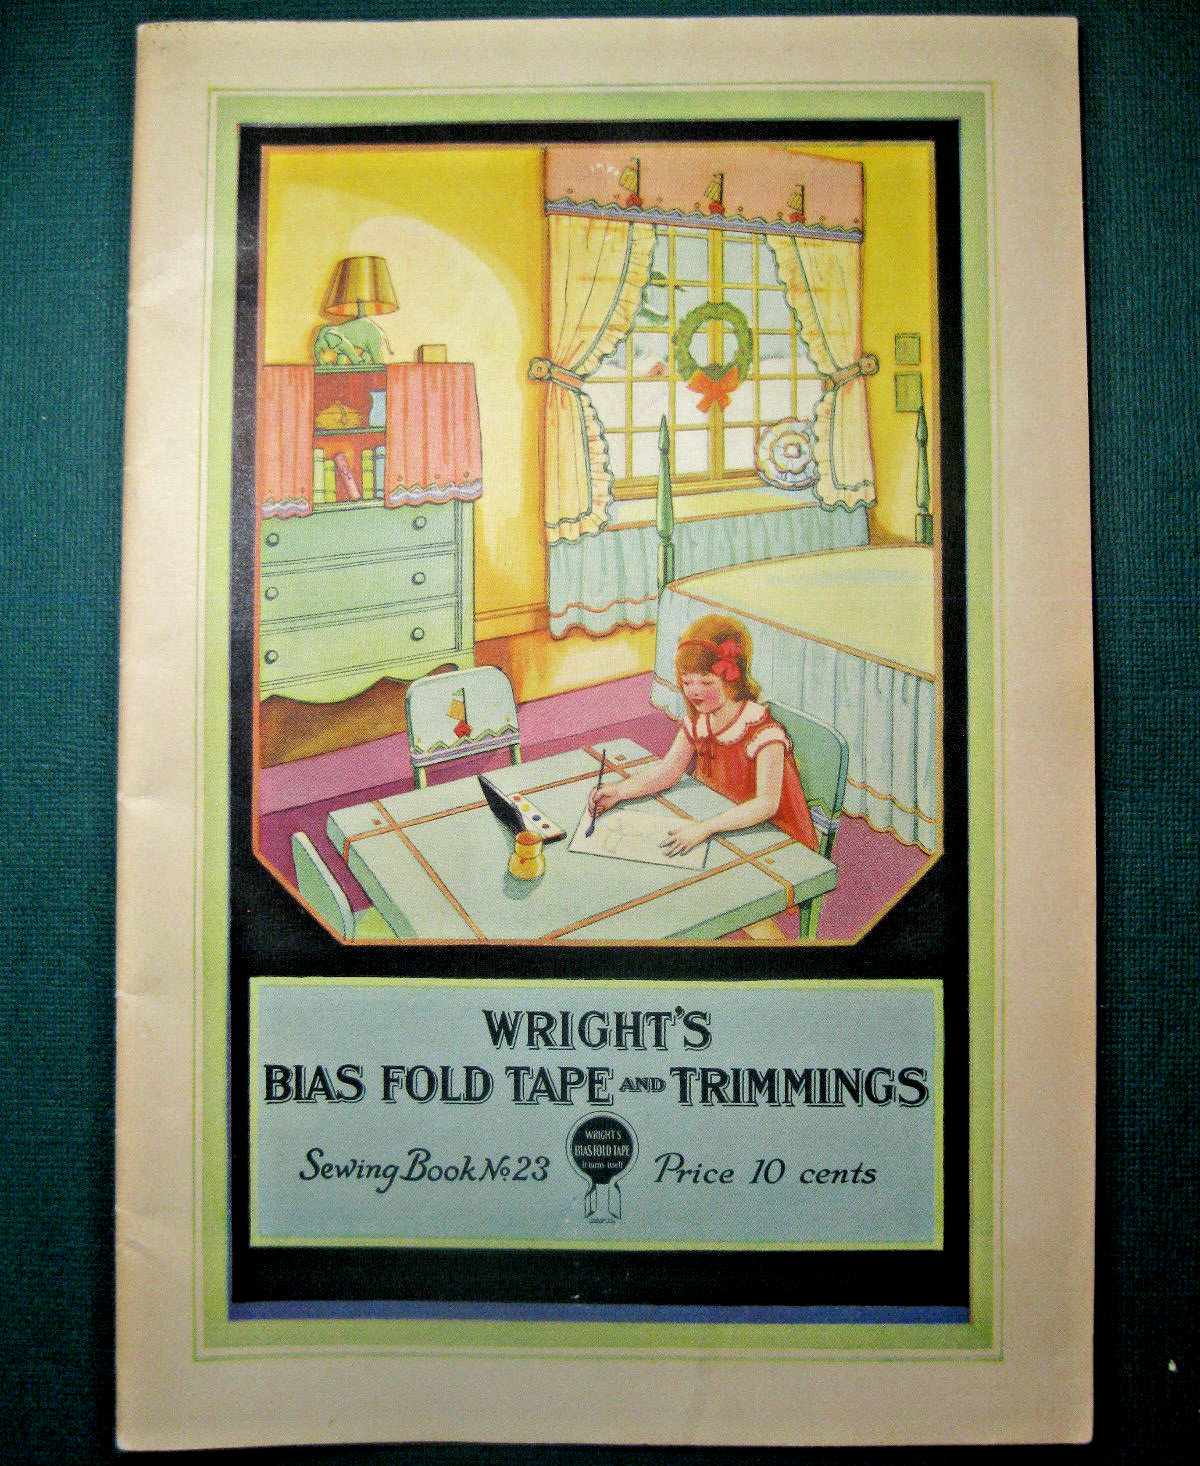 Vintage 1930 Wright's Bias Tape & Trimmings Sewing Book #23 (Excellent)